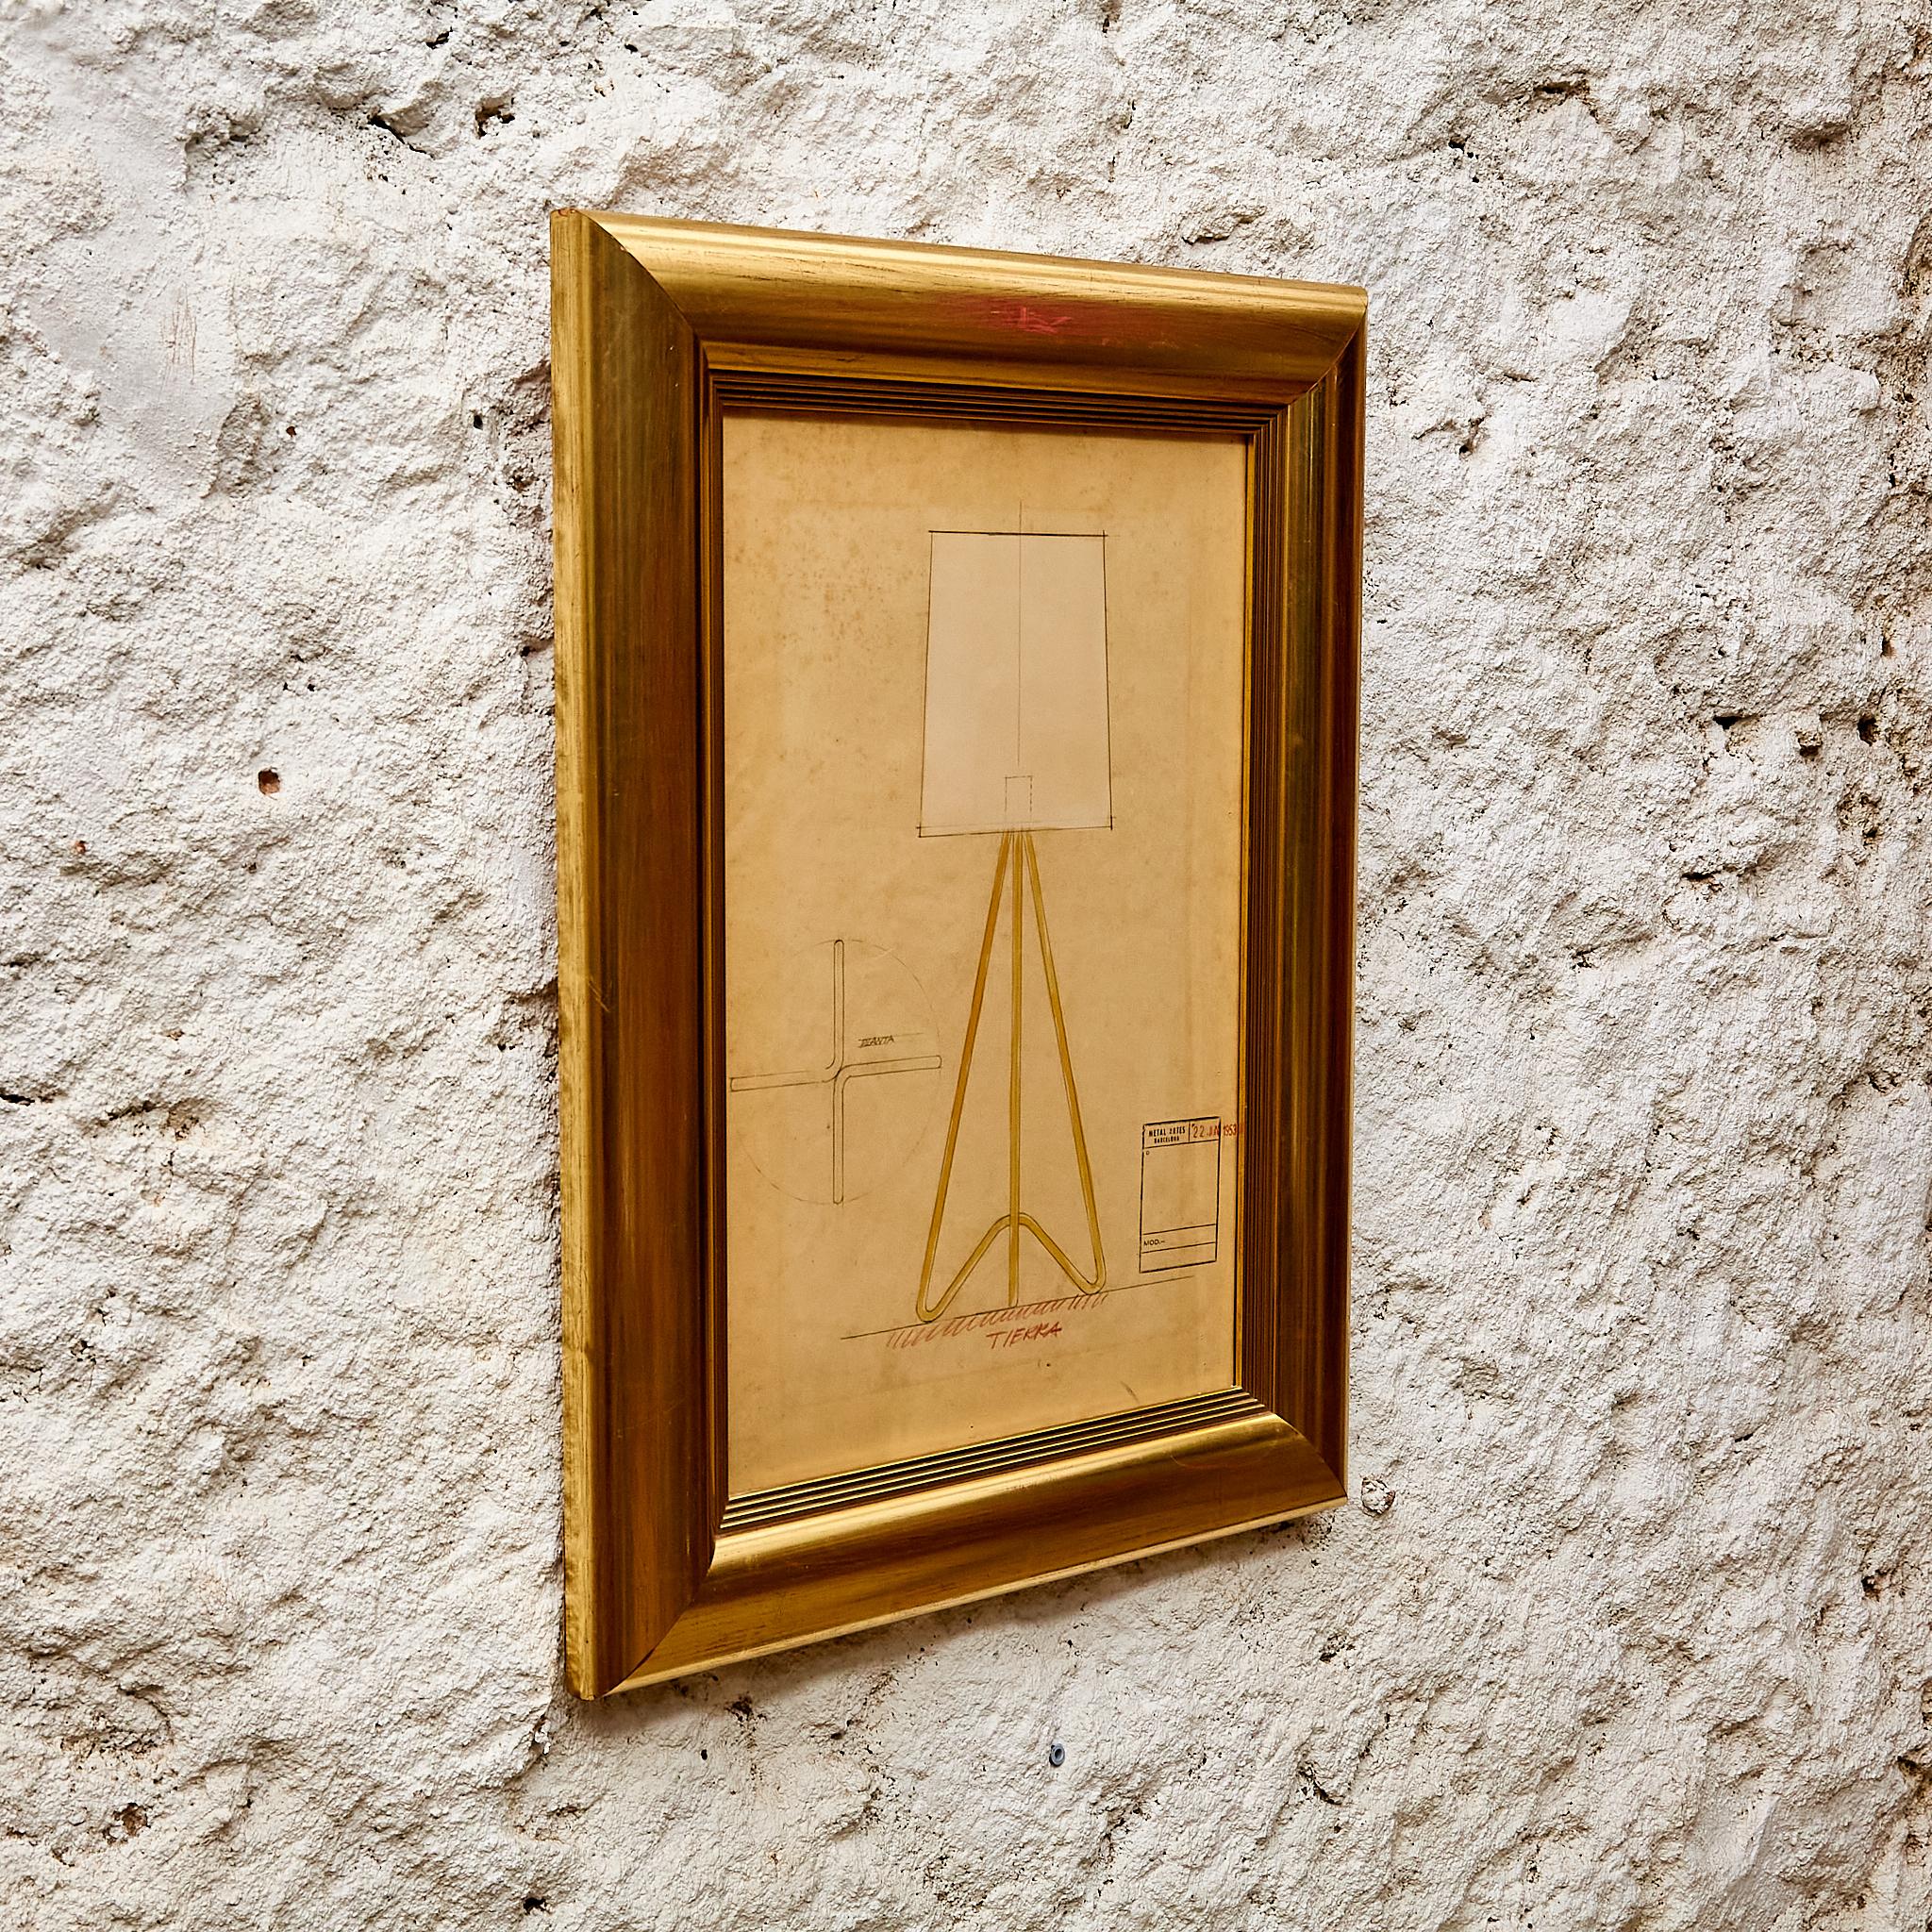 Framed Original Technical Plan of Metalarte Lamp.

Manufactured Spain, circa 1953.

Dimensions: 
D 4 x W 45 H 62 cm

In original condition, with minor wear consistent with age and use, preserving a beautiful patina.

Important information